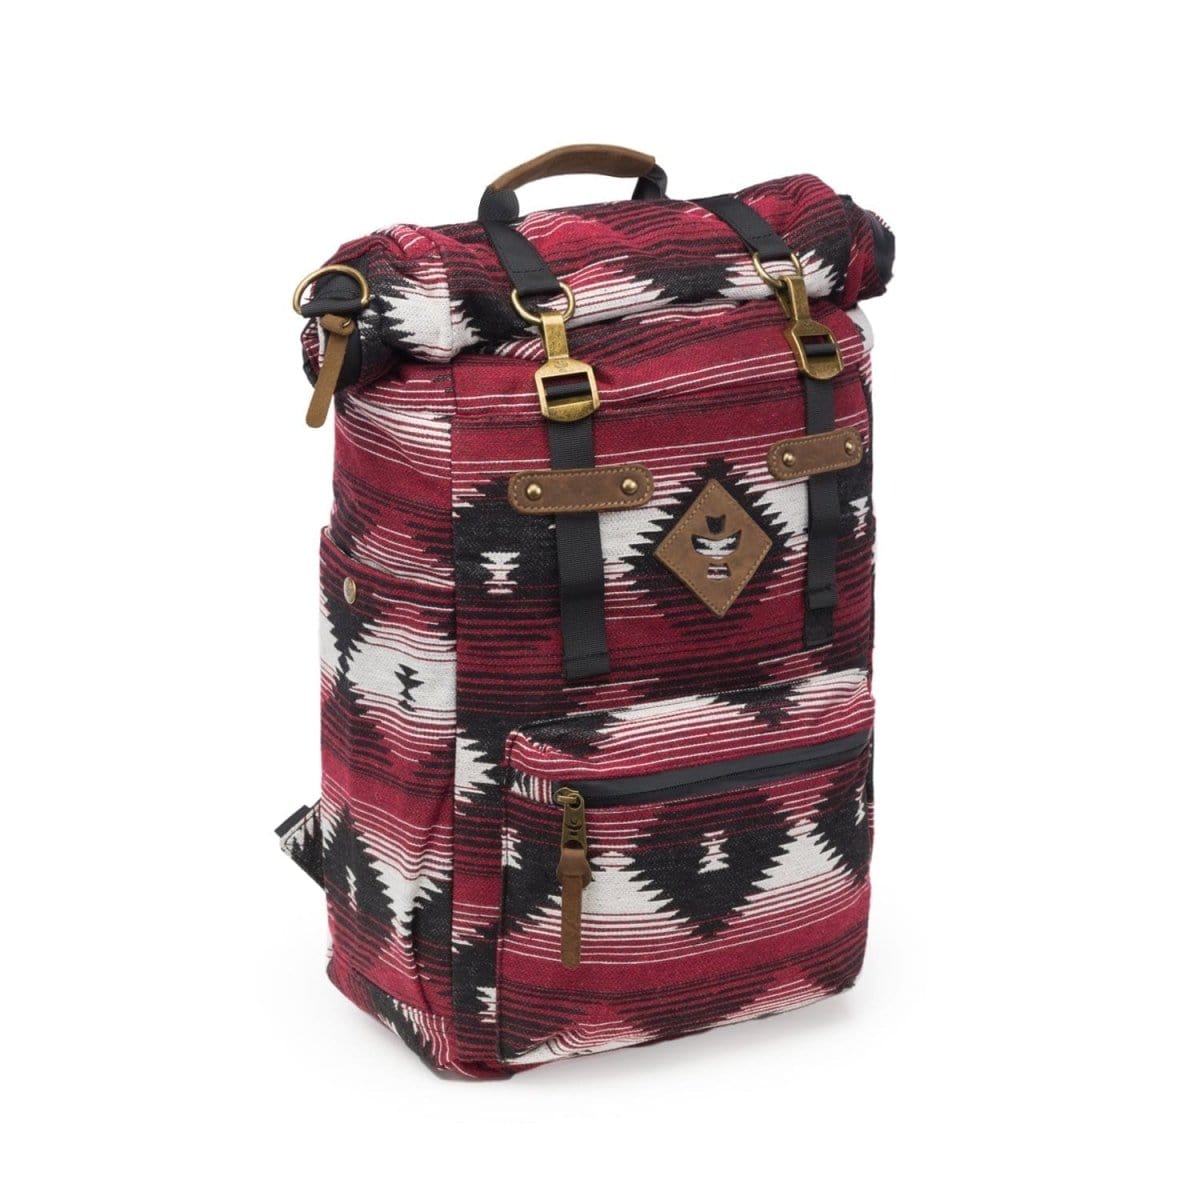 Revelry Supply Travel Bag Maroon Pattern The Drifter - Smell Proof Rolltop Backpack